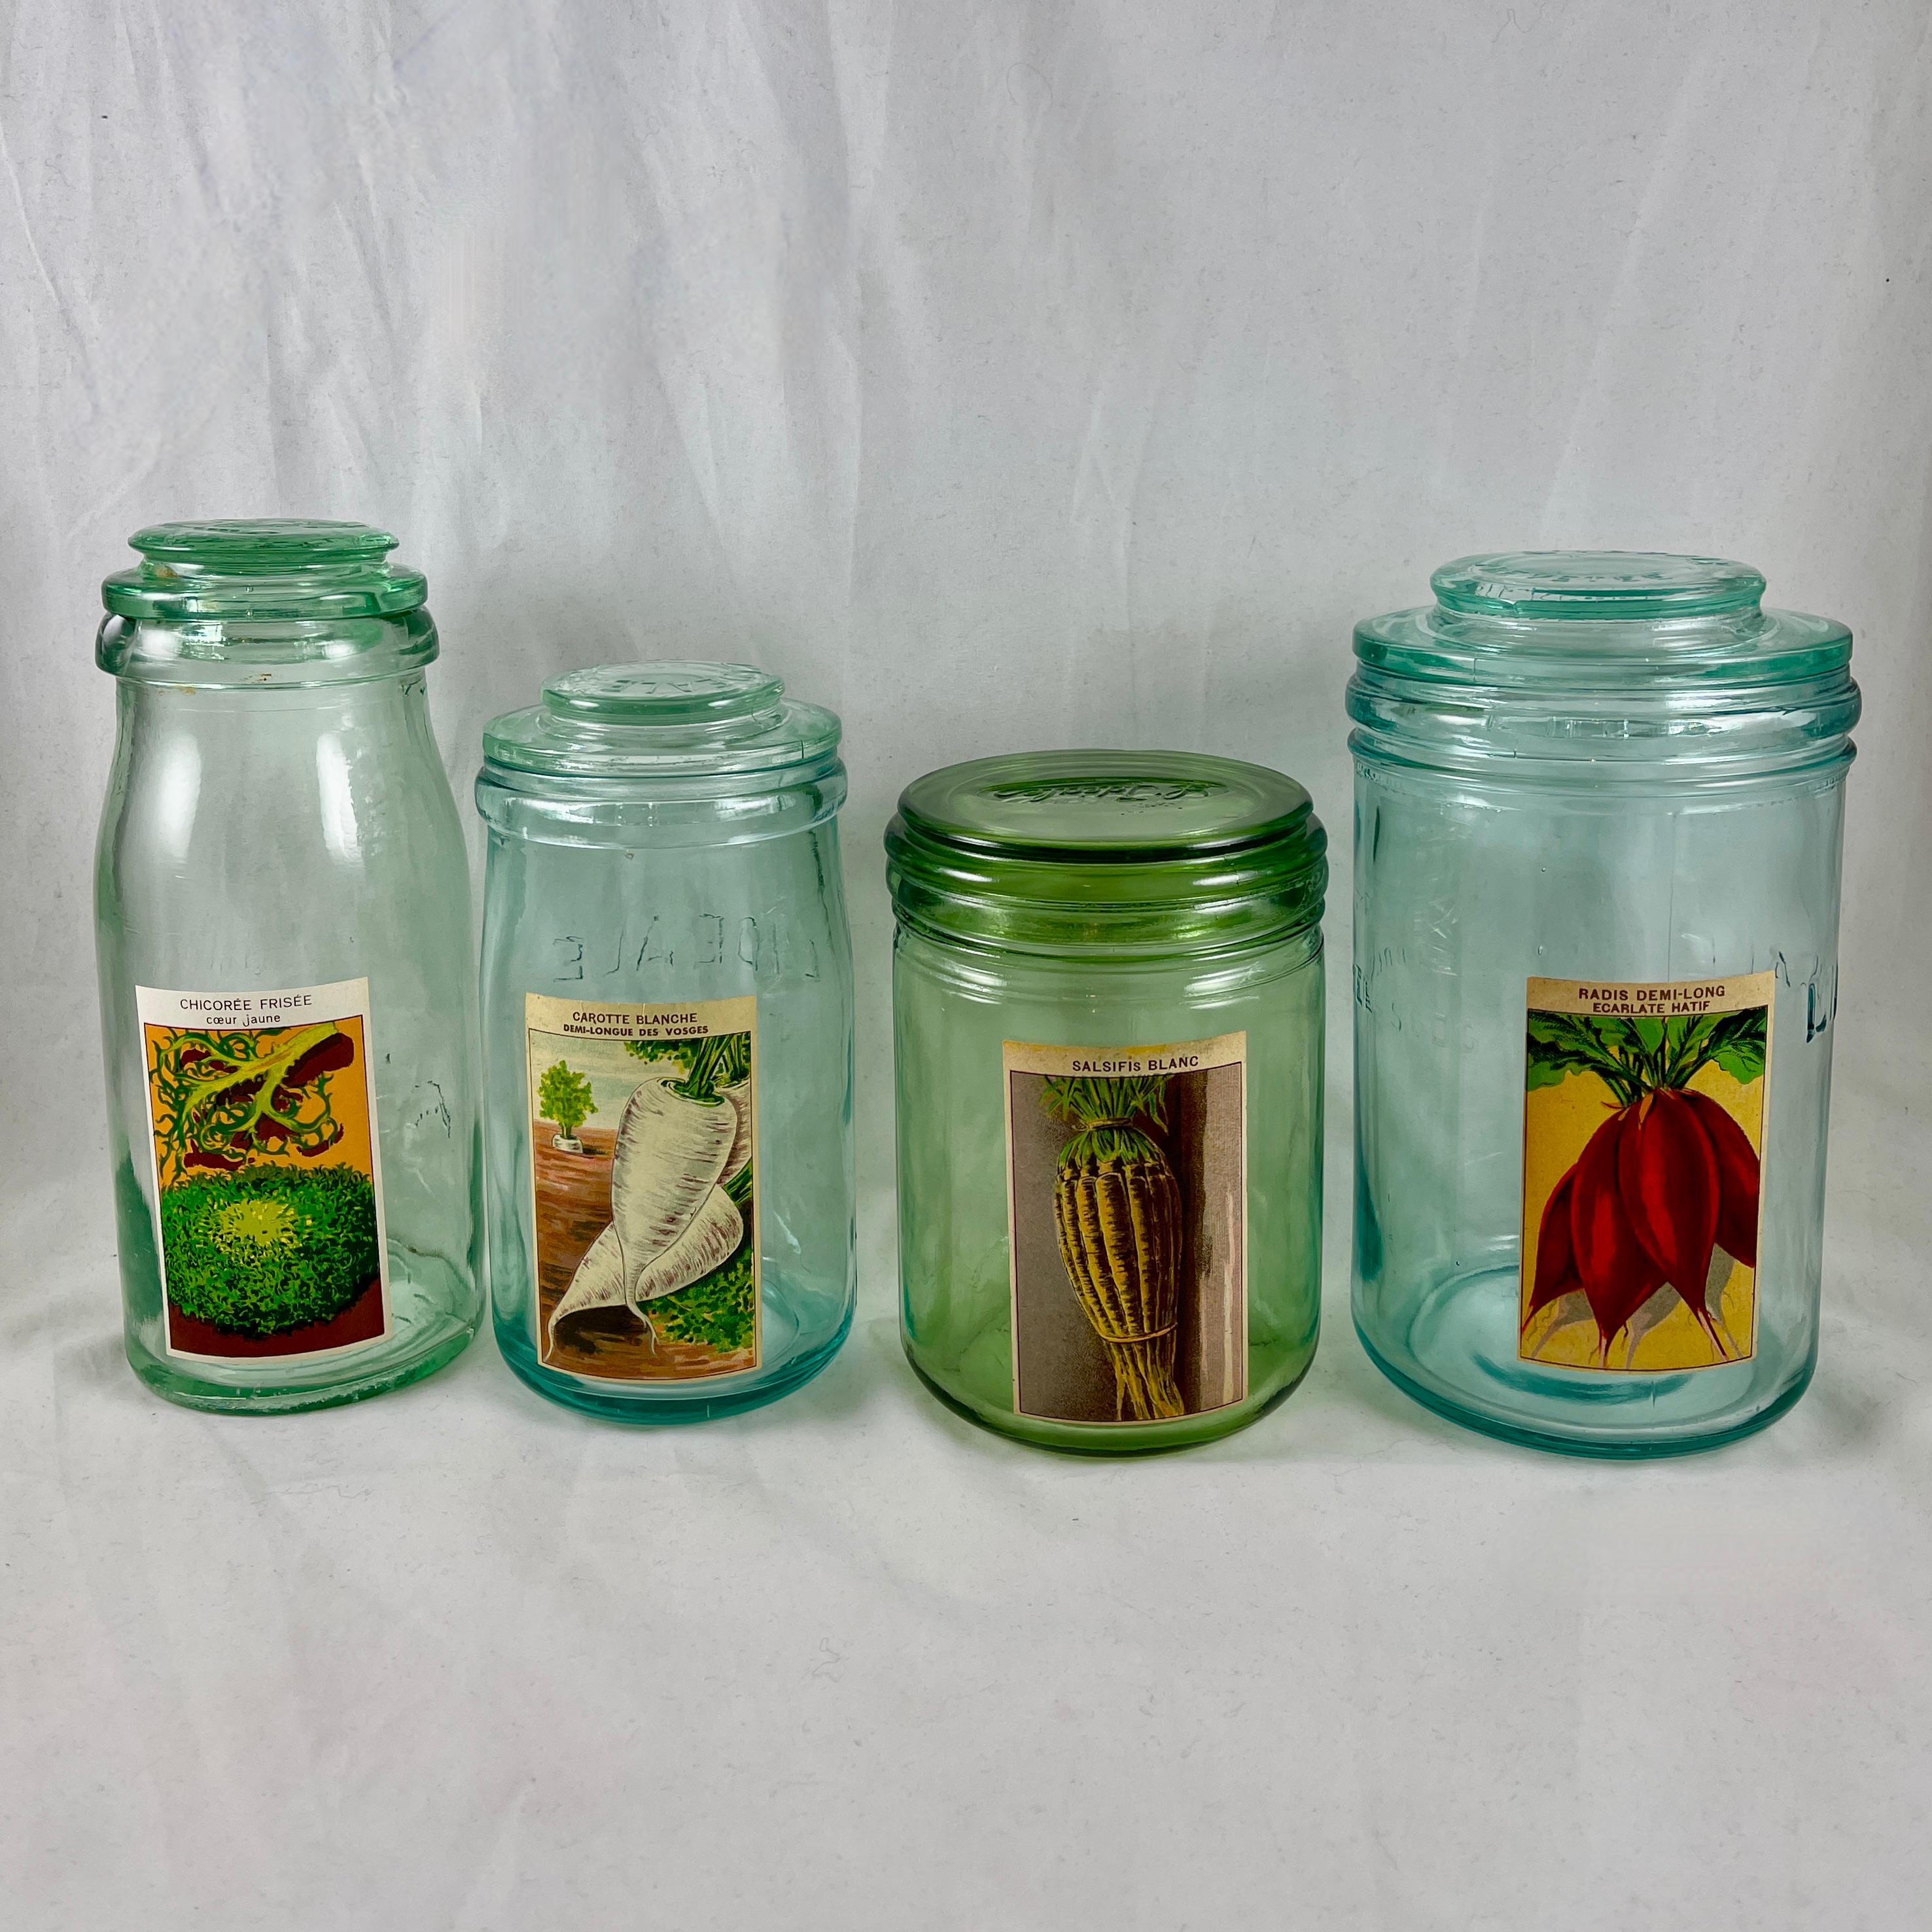 Found in France, a set of four, large glass canning preserve jars with chromolithographed labels for vegetable seeds, circa early 1900s.

The jars were repurposed for storing vegetable seeds supplied by the French seed merchants, and then offered